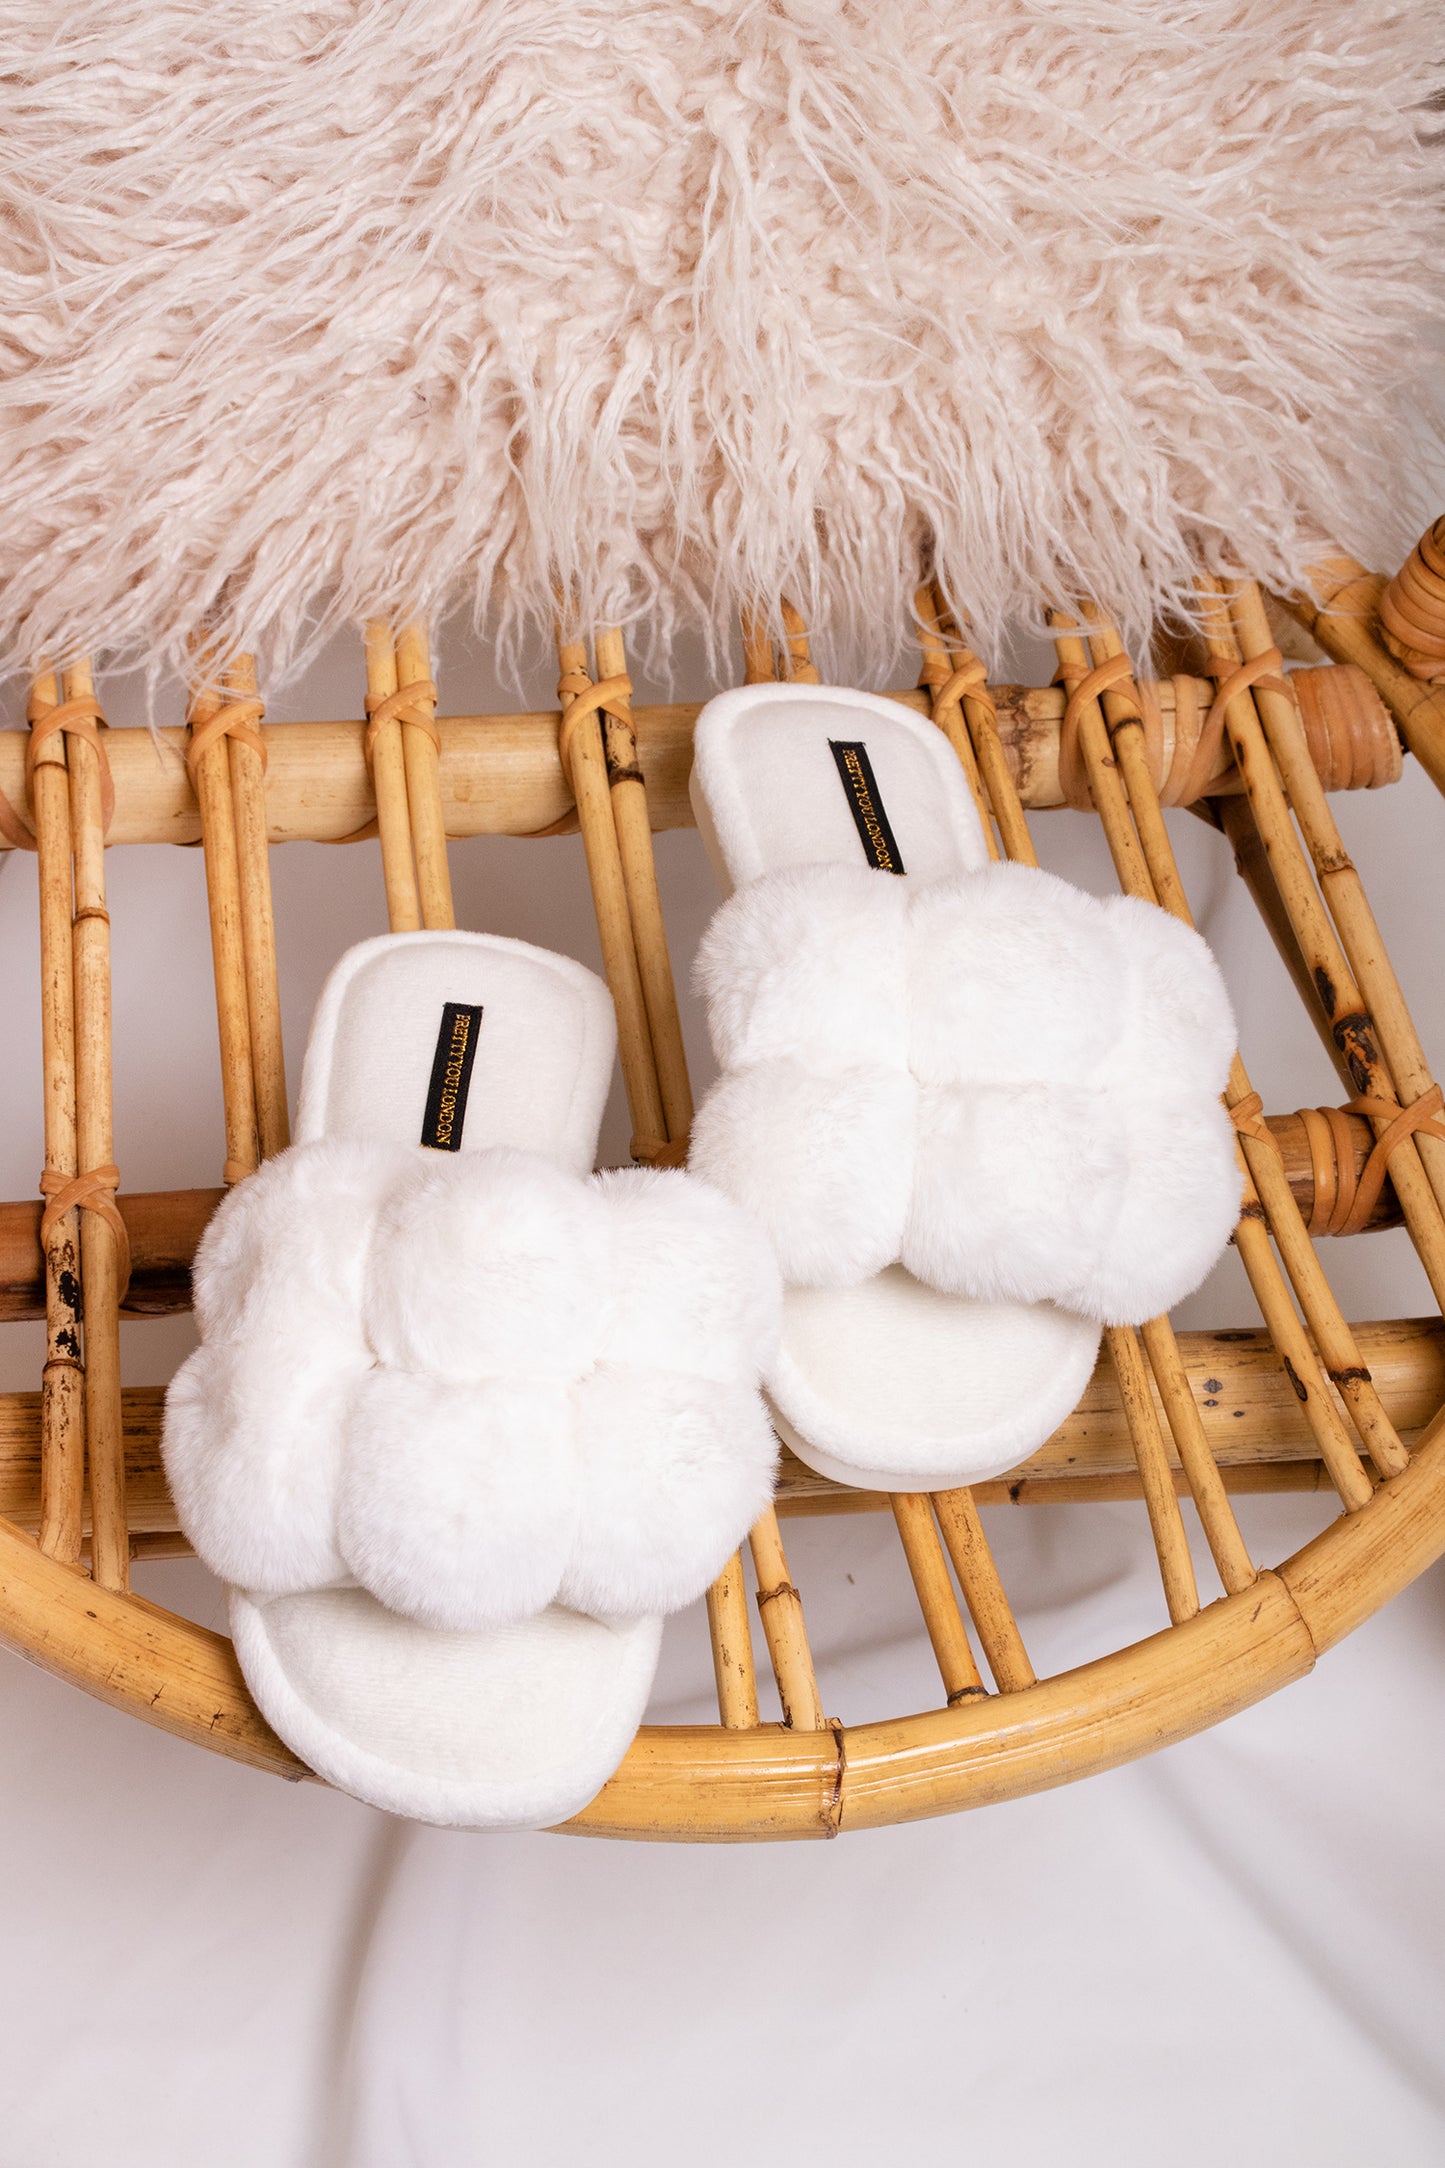 Dolly women's slider slippers in white with oversized faux fur pom poms from Pretty You London